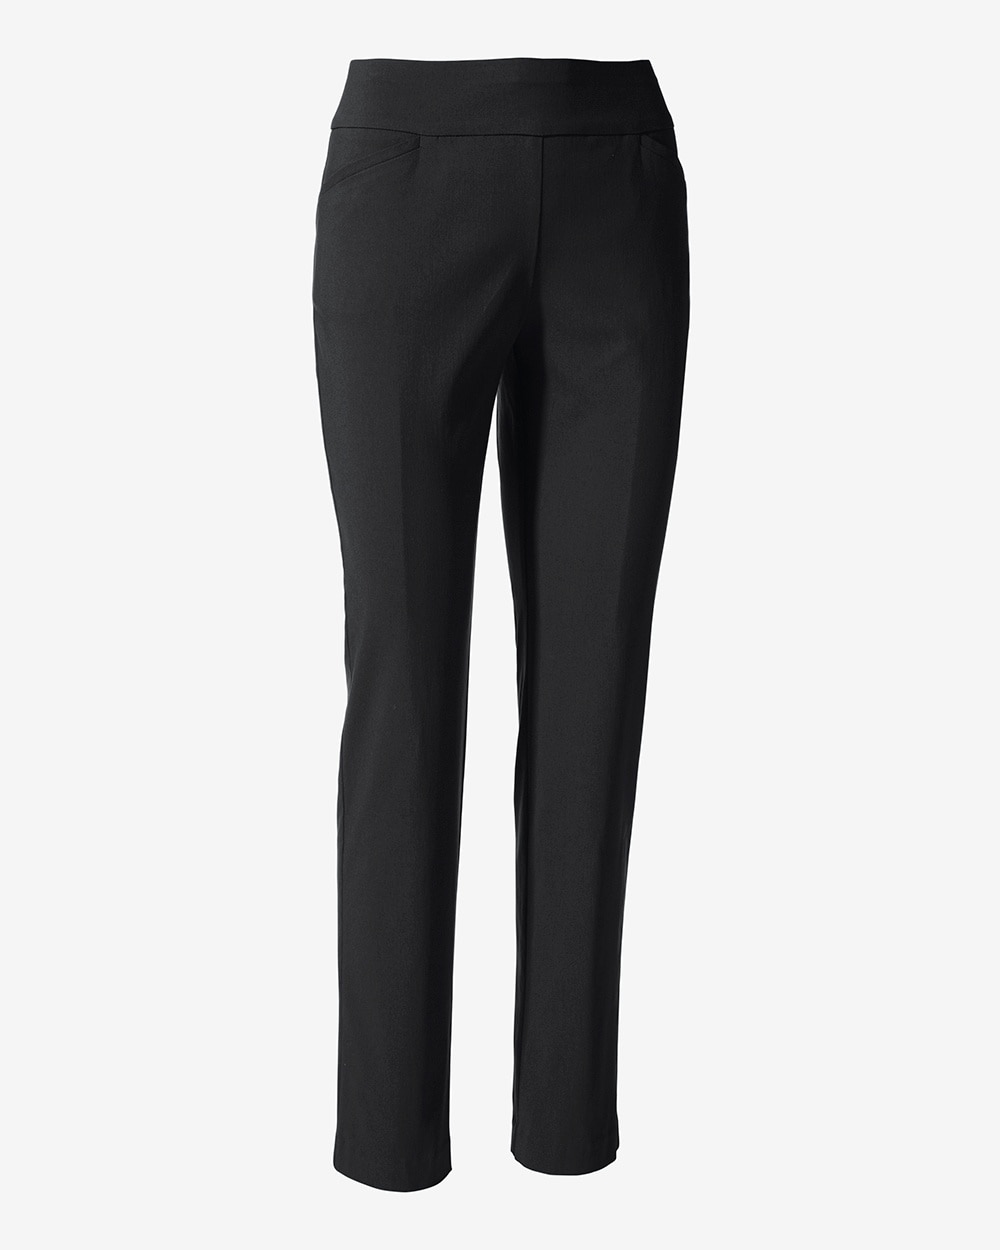 Perfect Stretch Fabulously Slimming Josie Pants